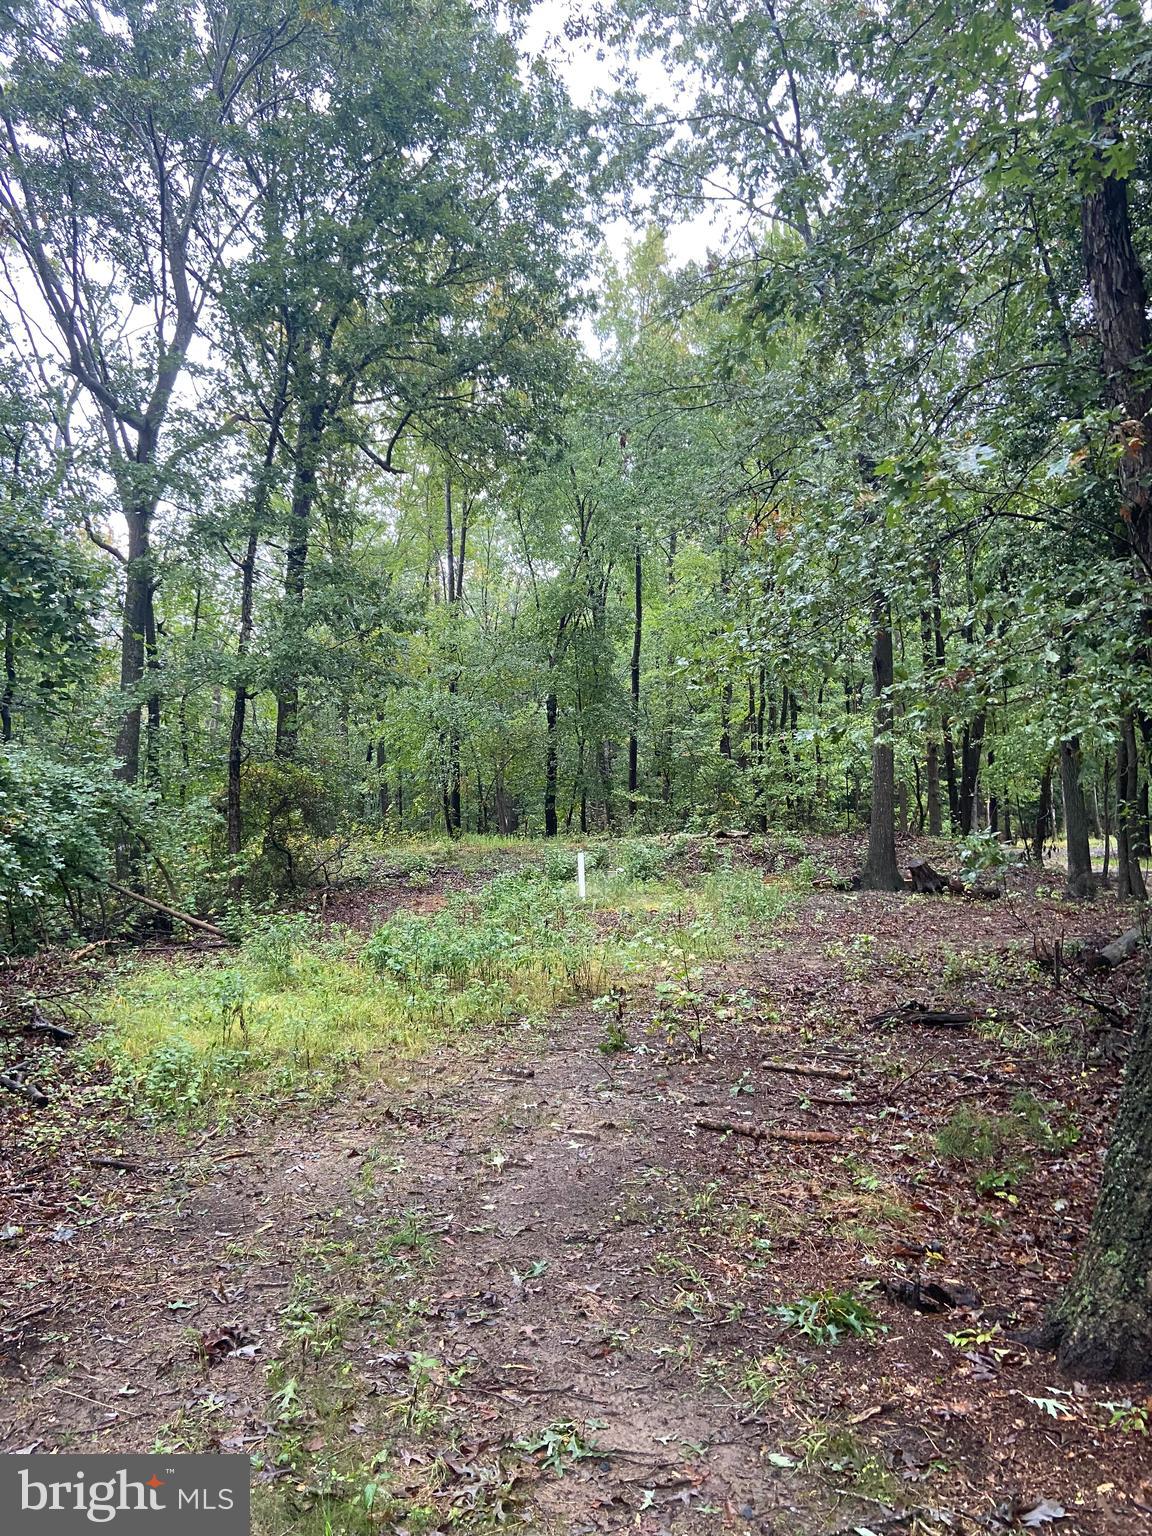 a view of a forest with trees in the background